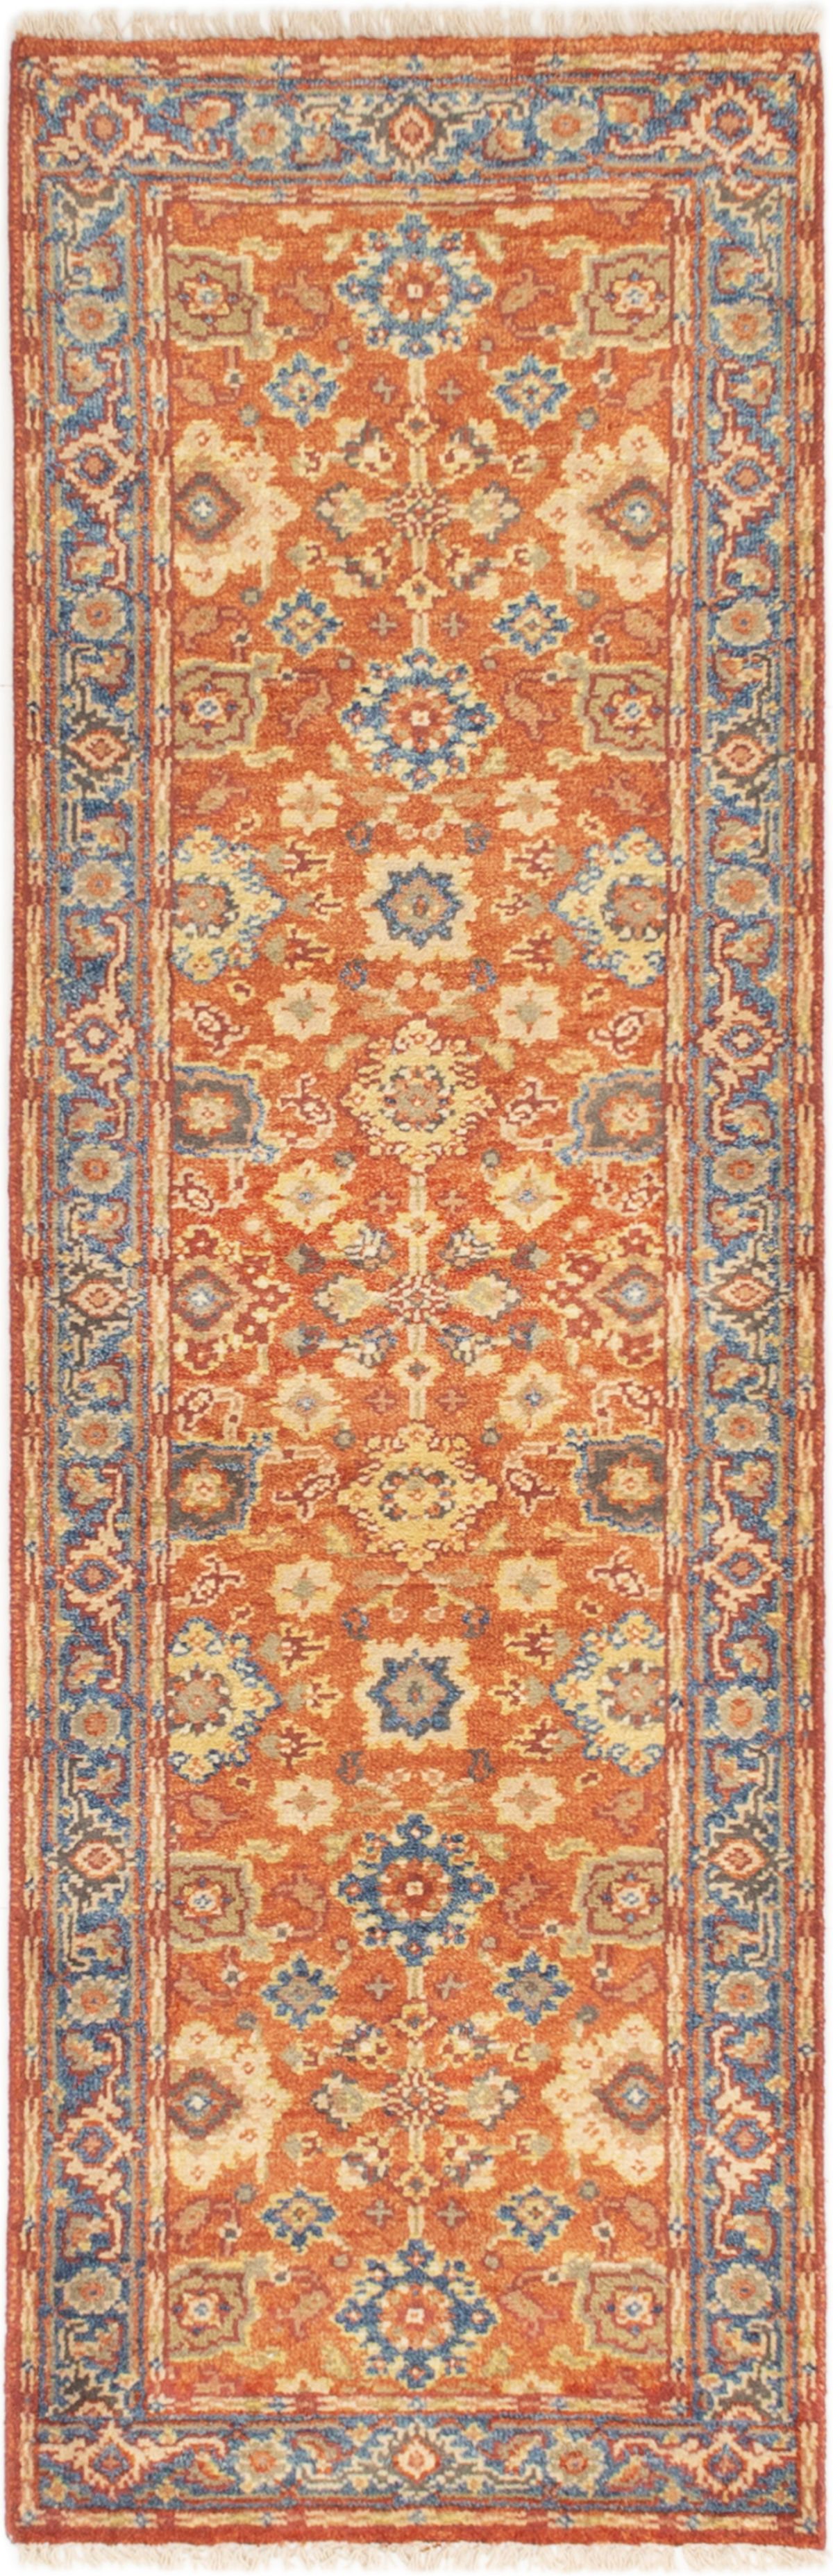 Hand-knotted Serapi Heritage Dark Copper Wool Rug 2'8" x 8'3"  Size: 2'8" x 8'3"  